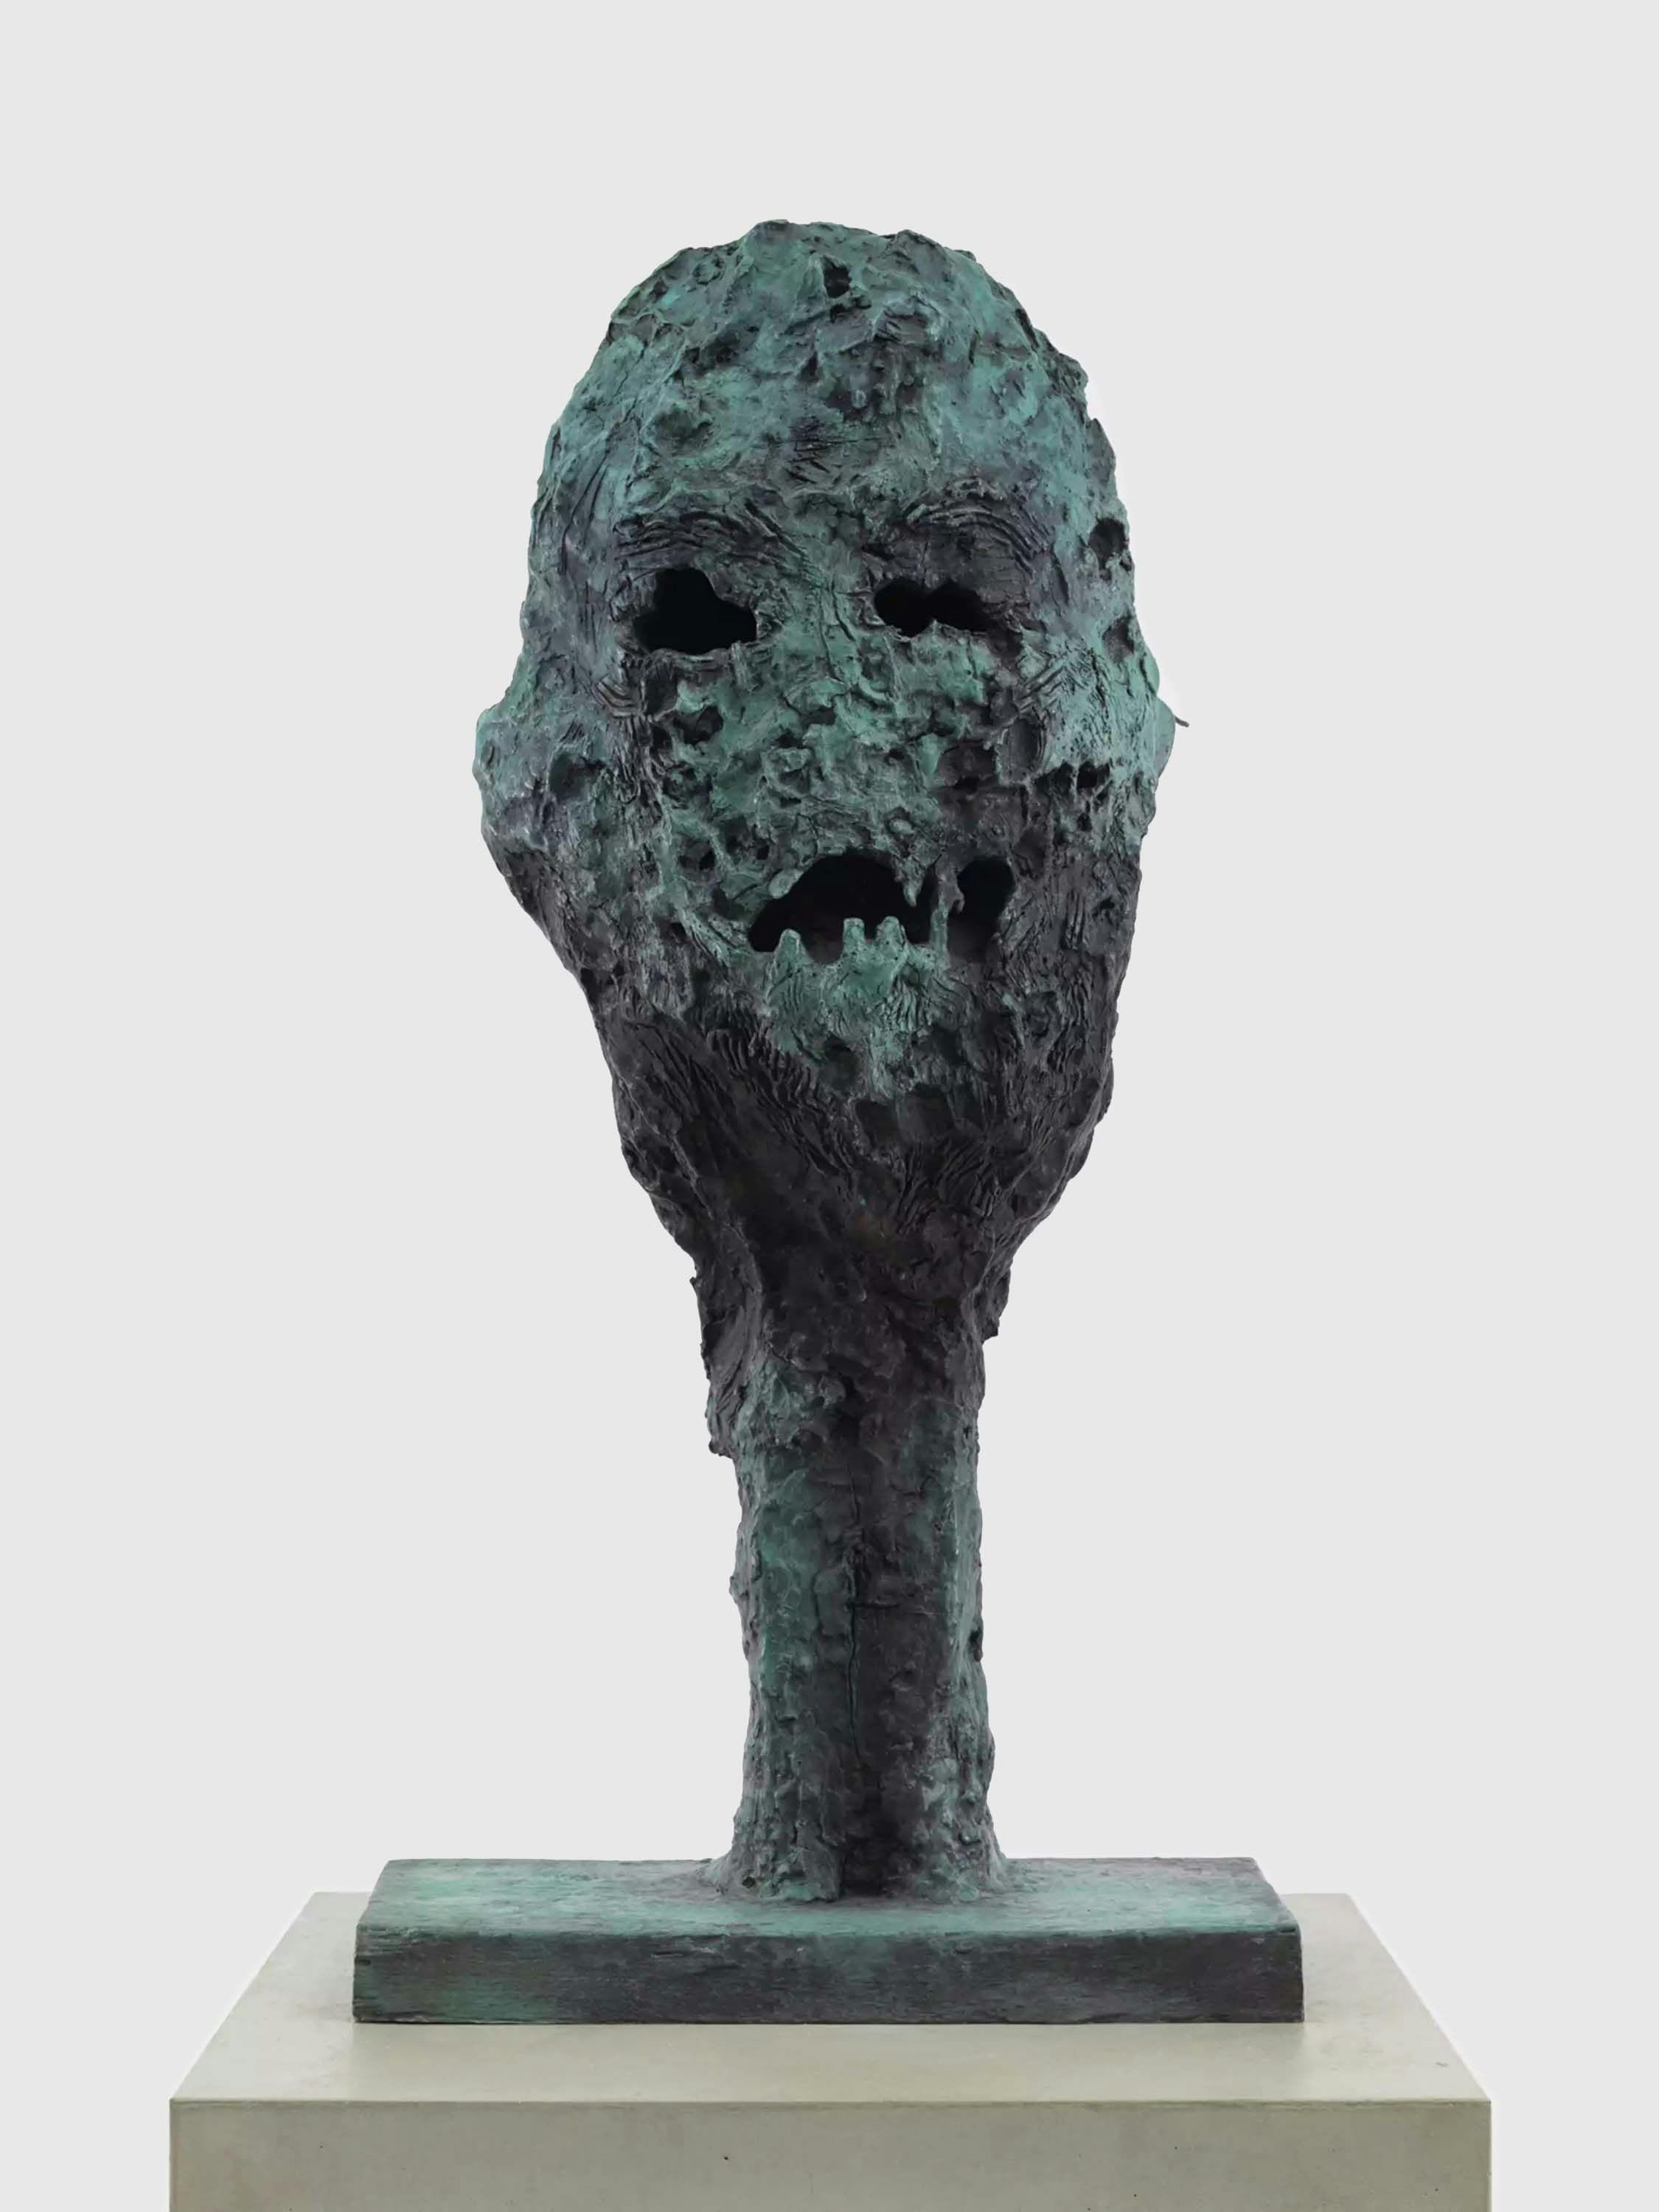 A patinated bronze artwork by Huma Bhabha, titled The Ancient and Arcane, dated 2021.